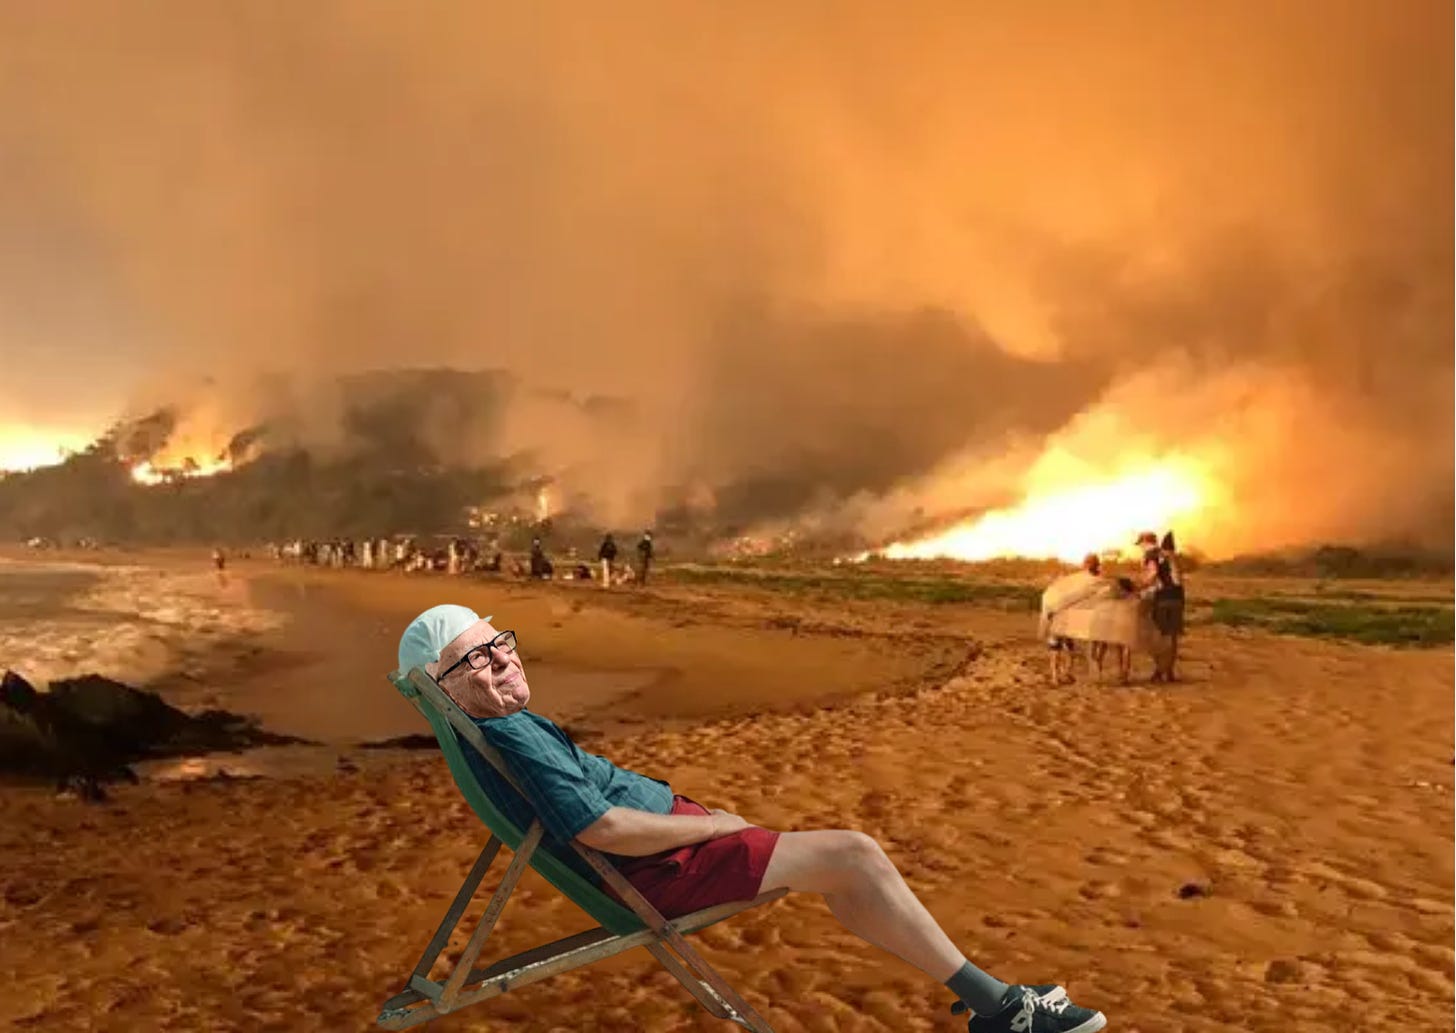 Rupert Murdoch sits in a deckchair with a knotted hankerchief on his head, while the world burns